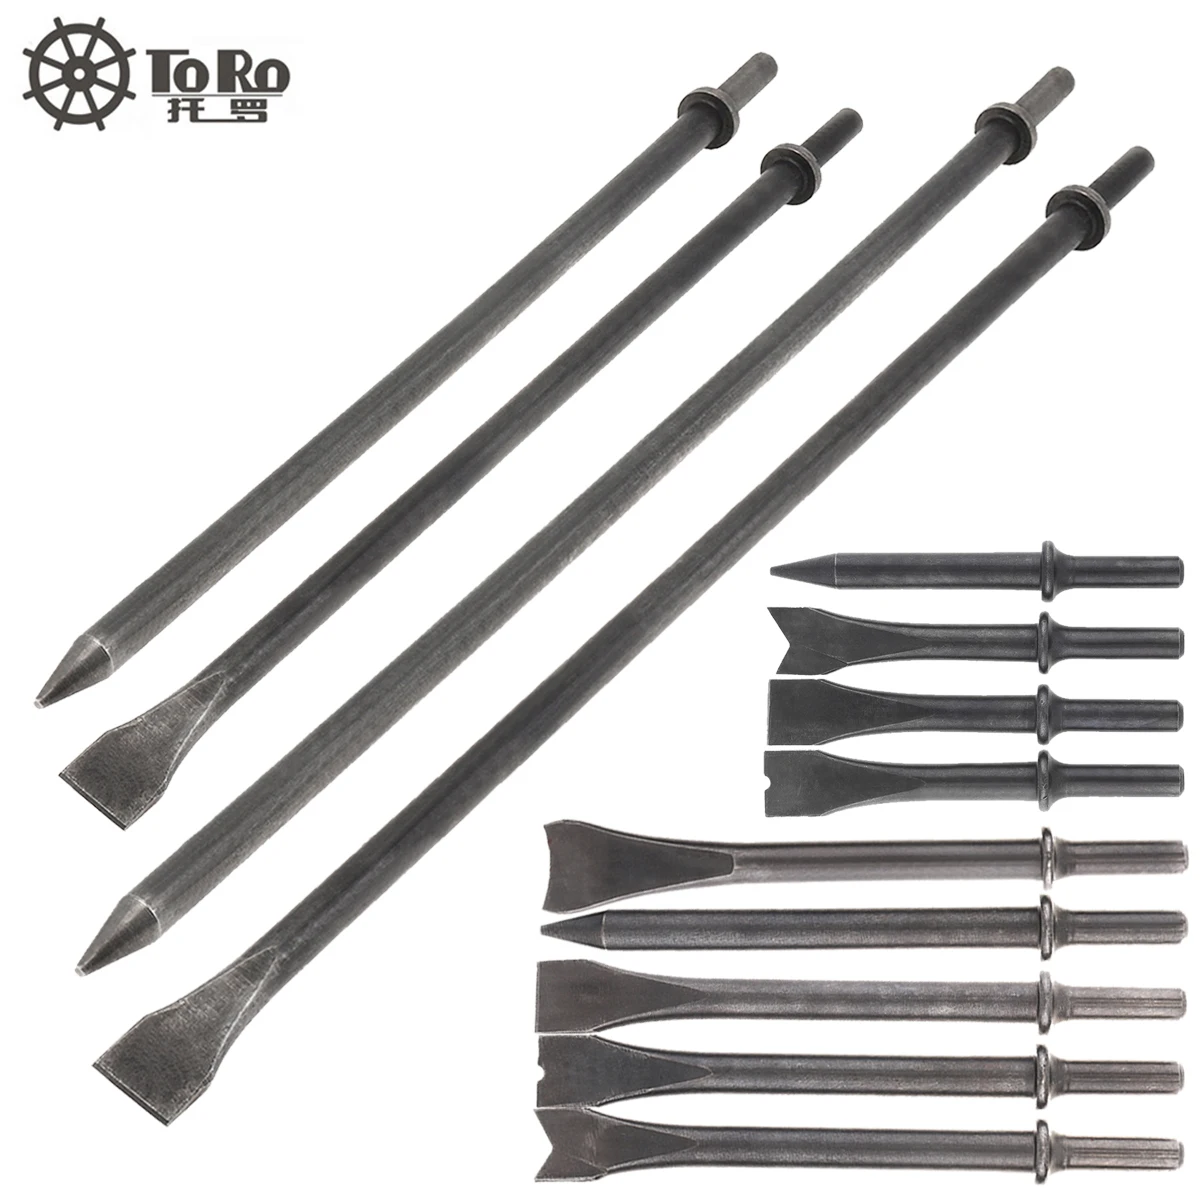 4/5pcs/set Air Chisel Impact Head Hard 45# Steel 125/175mm Solid Long Impact Head Support PneumaticTool for Cutting Removal 3pcs chisel drill bit tempered steel point chisel hex shank flat chisel rotary hammer spade chisel tile removal chisel kit